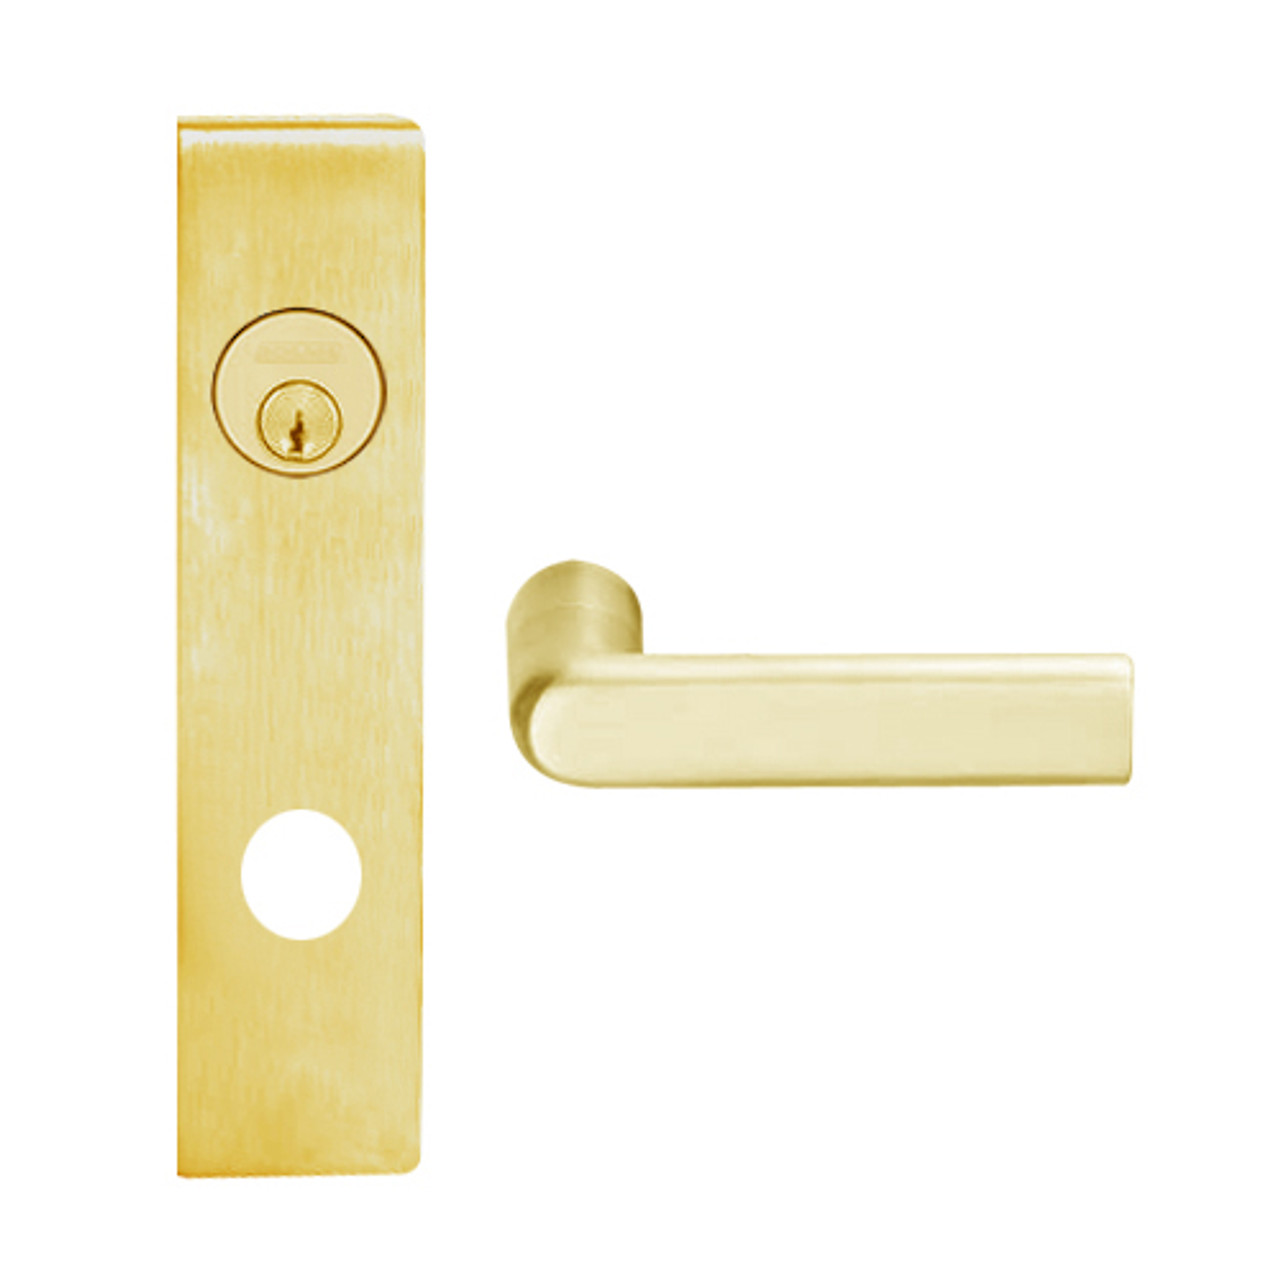 L9070L-01L-605 Schlage L Series Less Cylinder Classroom Commercial Mortise Lock with 01 Cast Lever Design in Bright Brass